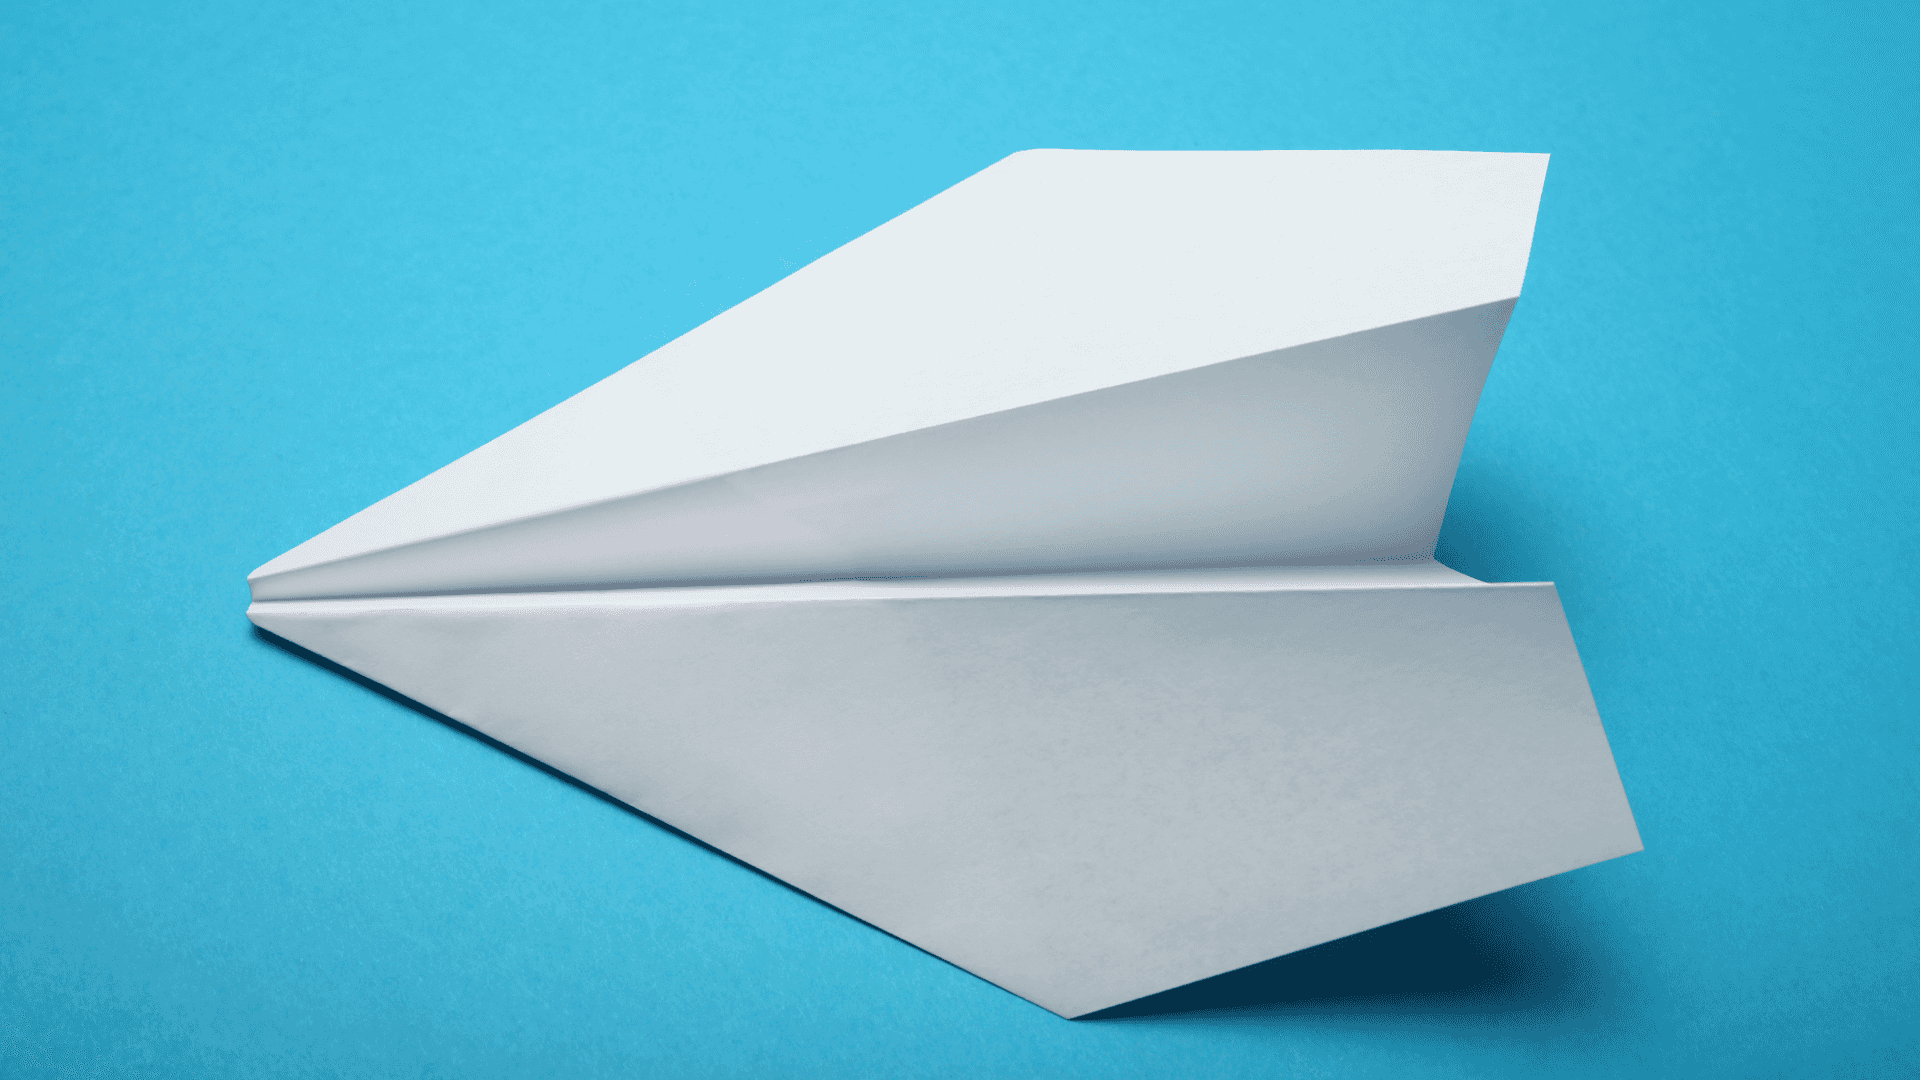 A White Paper Airplane On A Blue Background